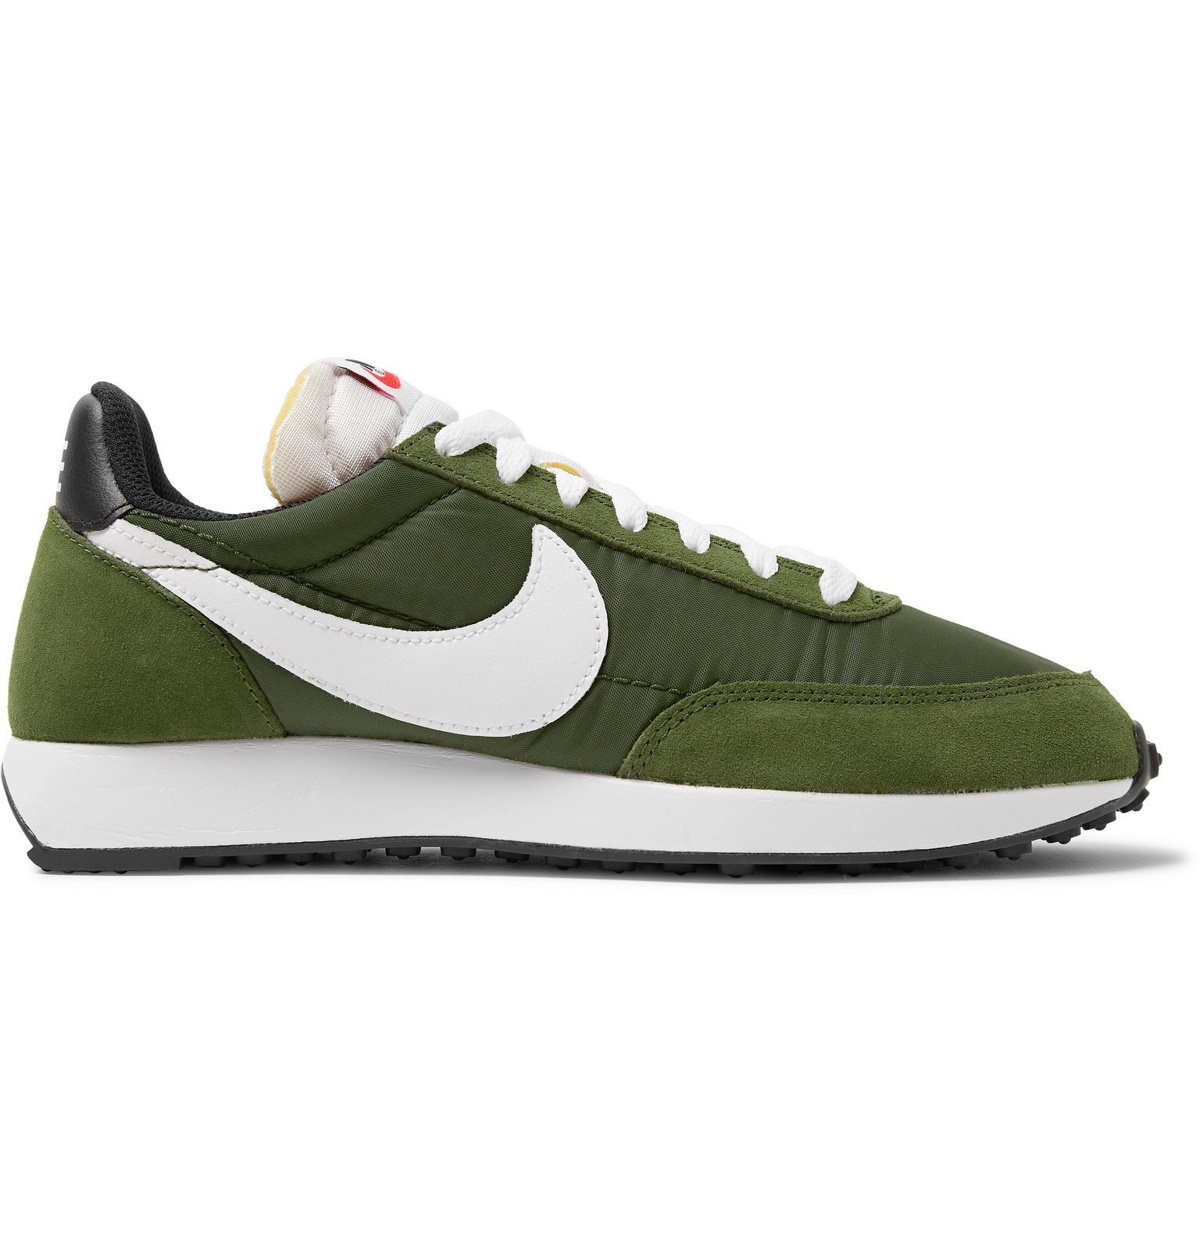 Excremento caliente Matemático Nike - Air Tailwind 79 Leather-Trimmed Suede and Shell Sneakers - Green Nike